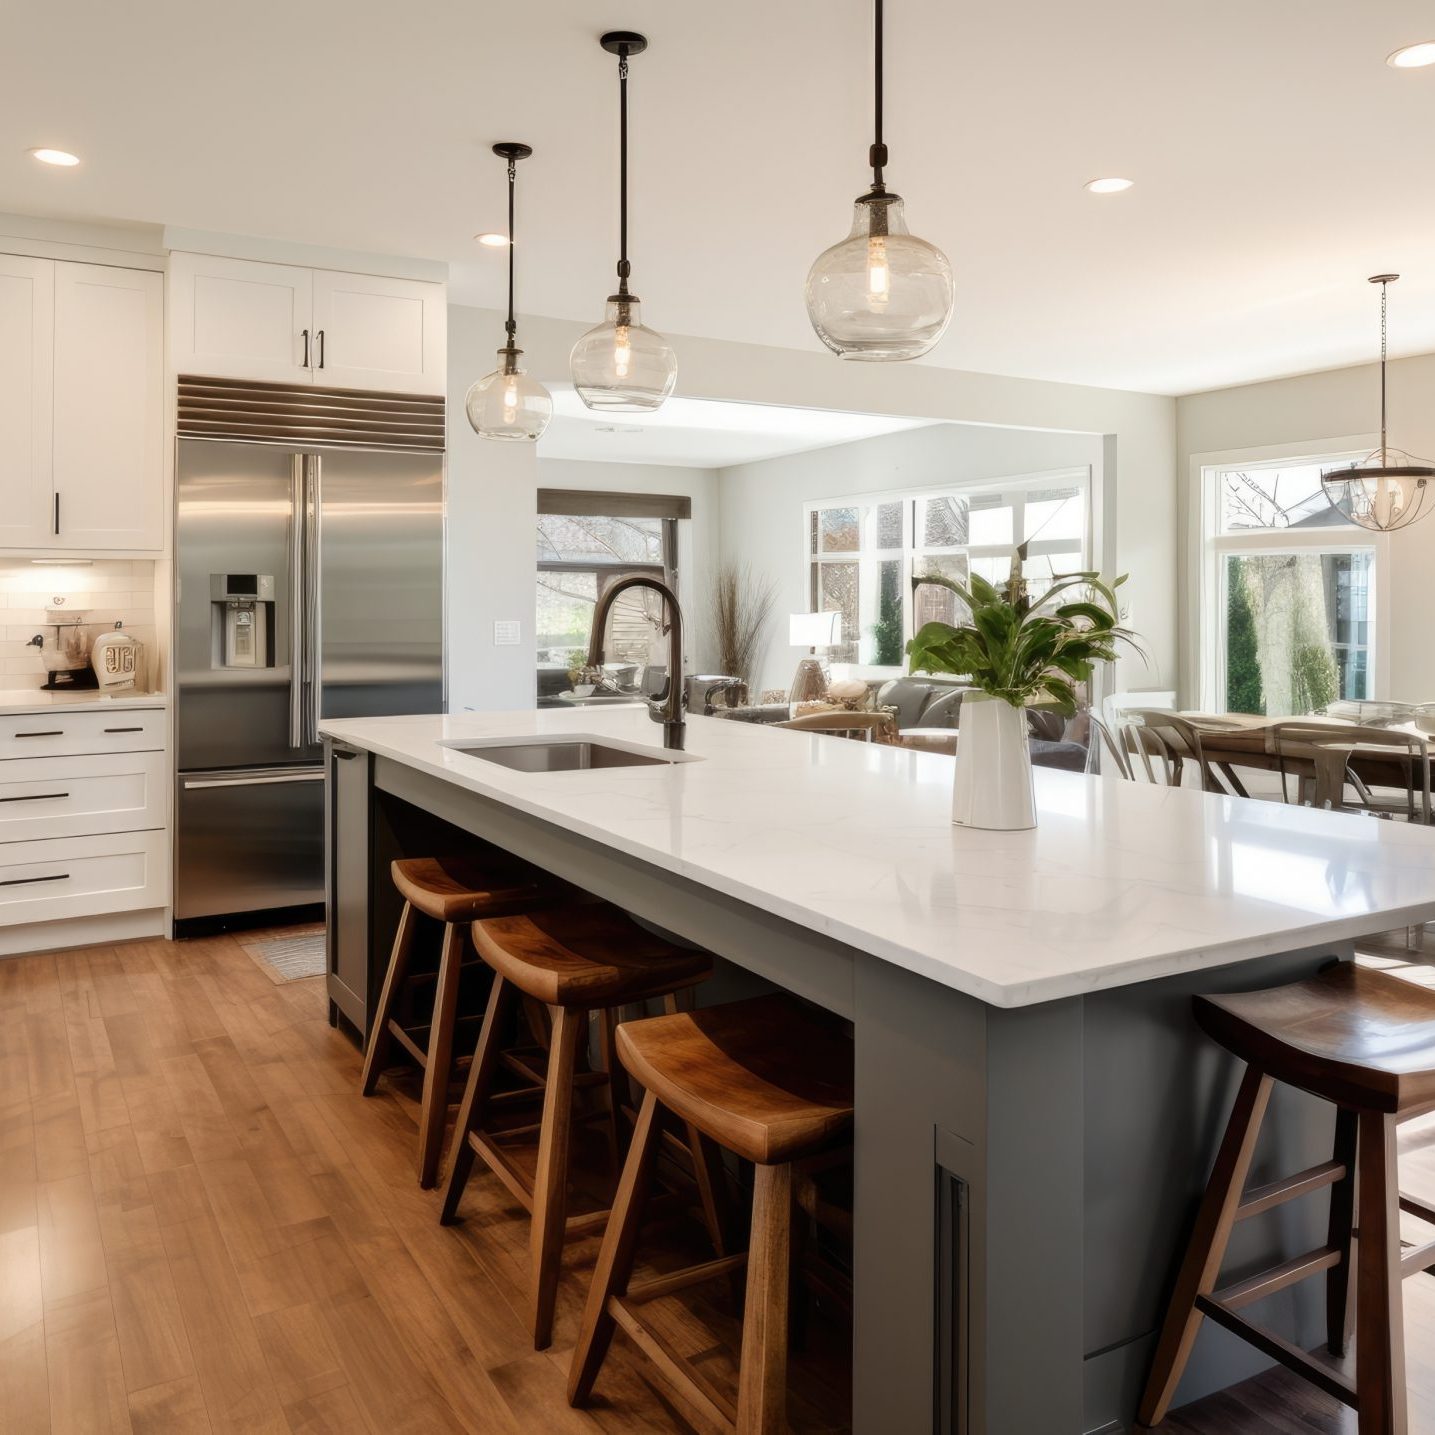 New custom home with a beautiful kitchen featuring hardwood floors, stainless steel appliances, quartz countertops, and a spacious island, on a sunny day.